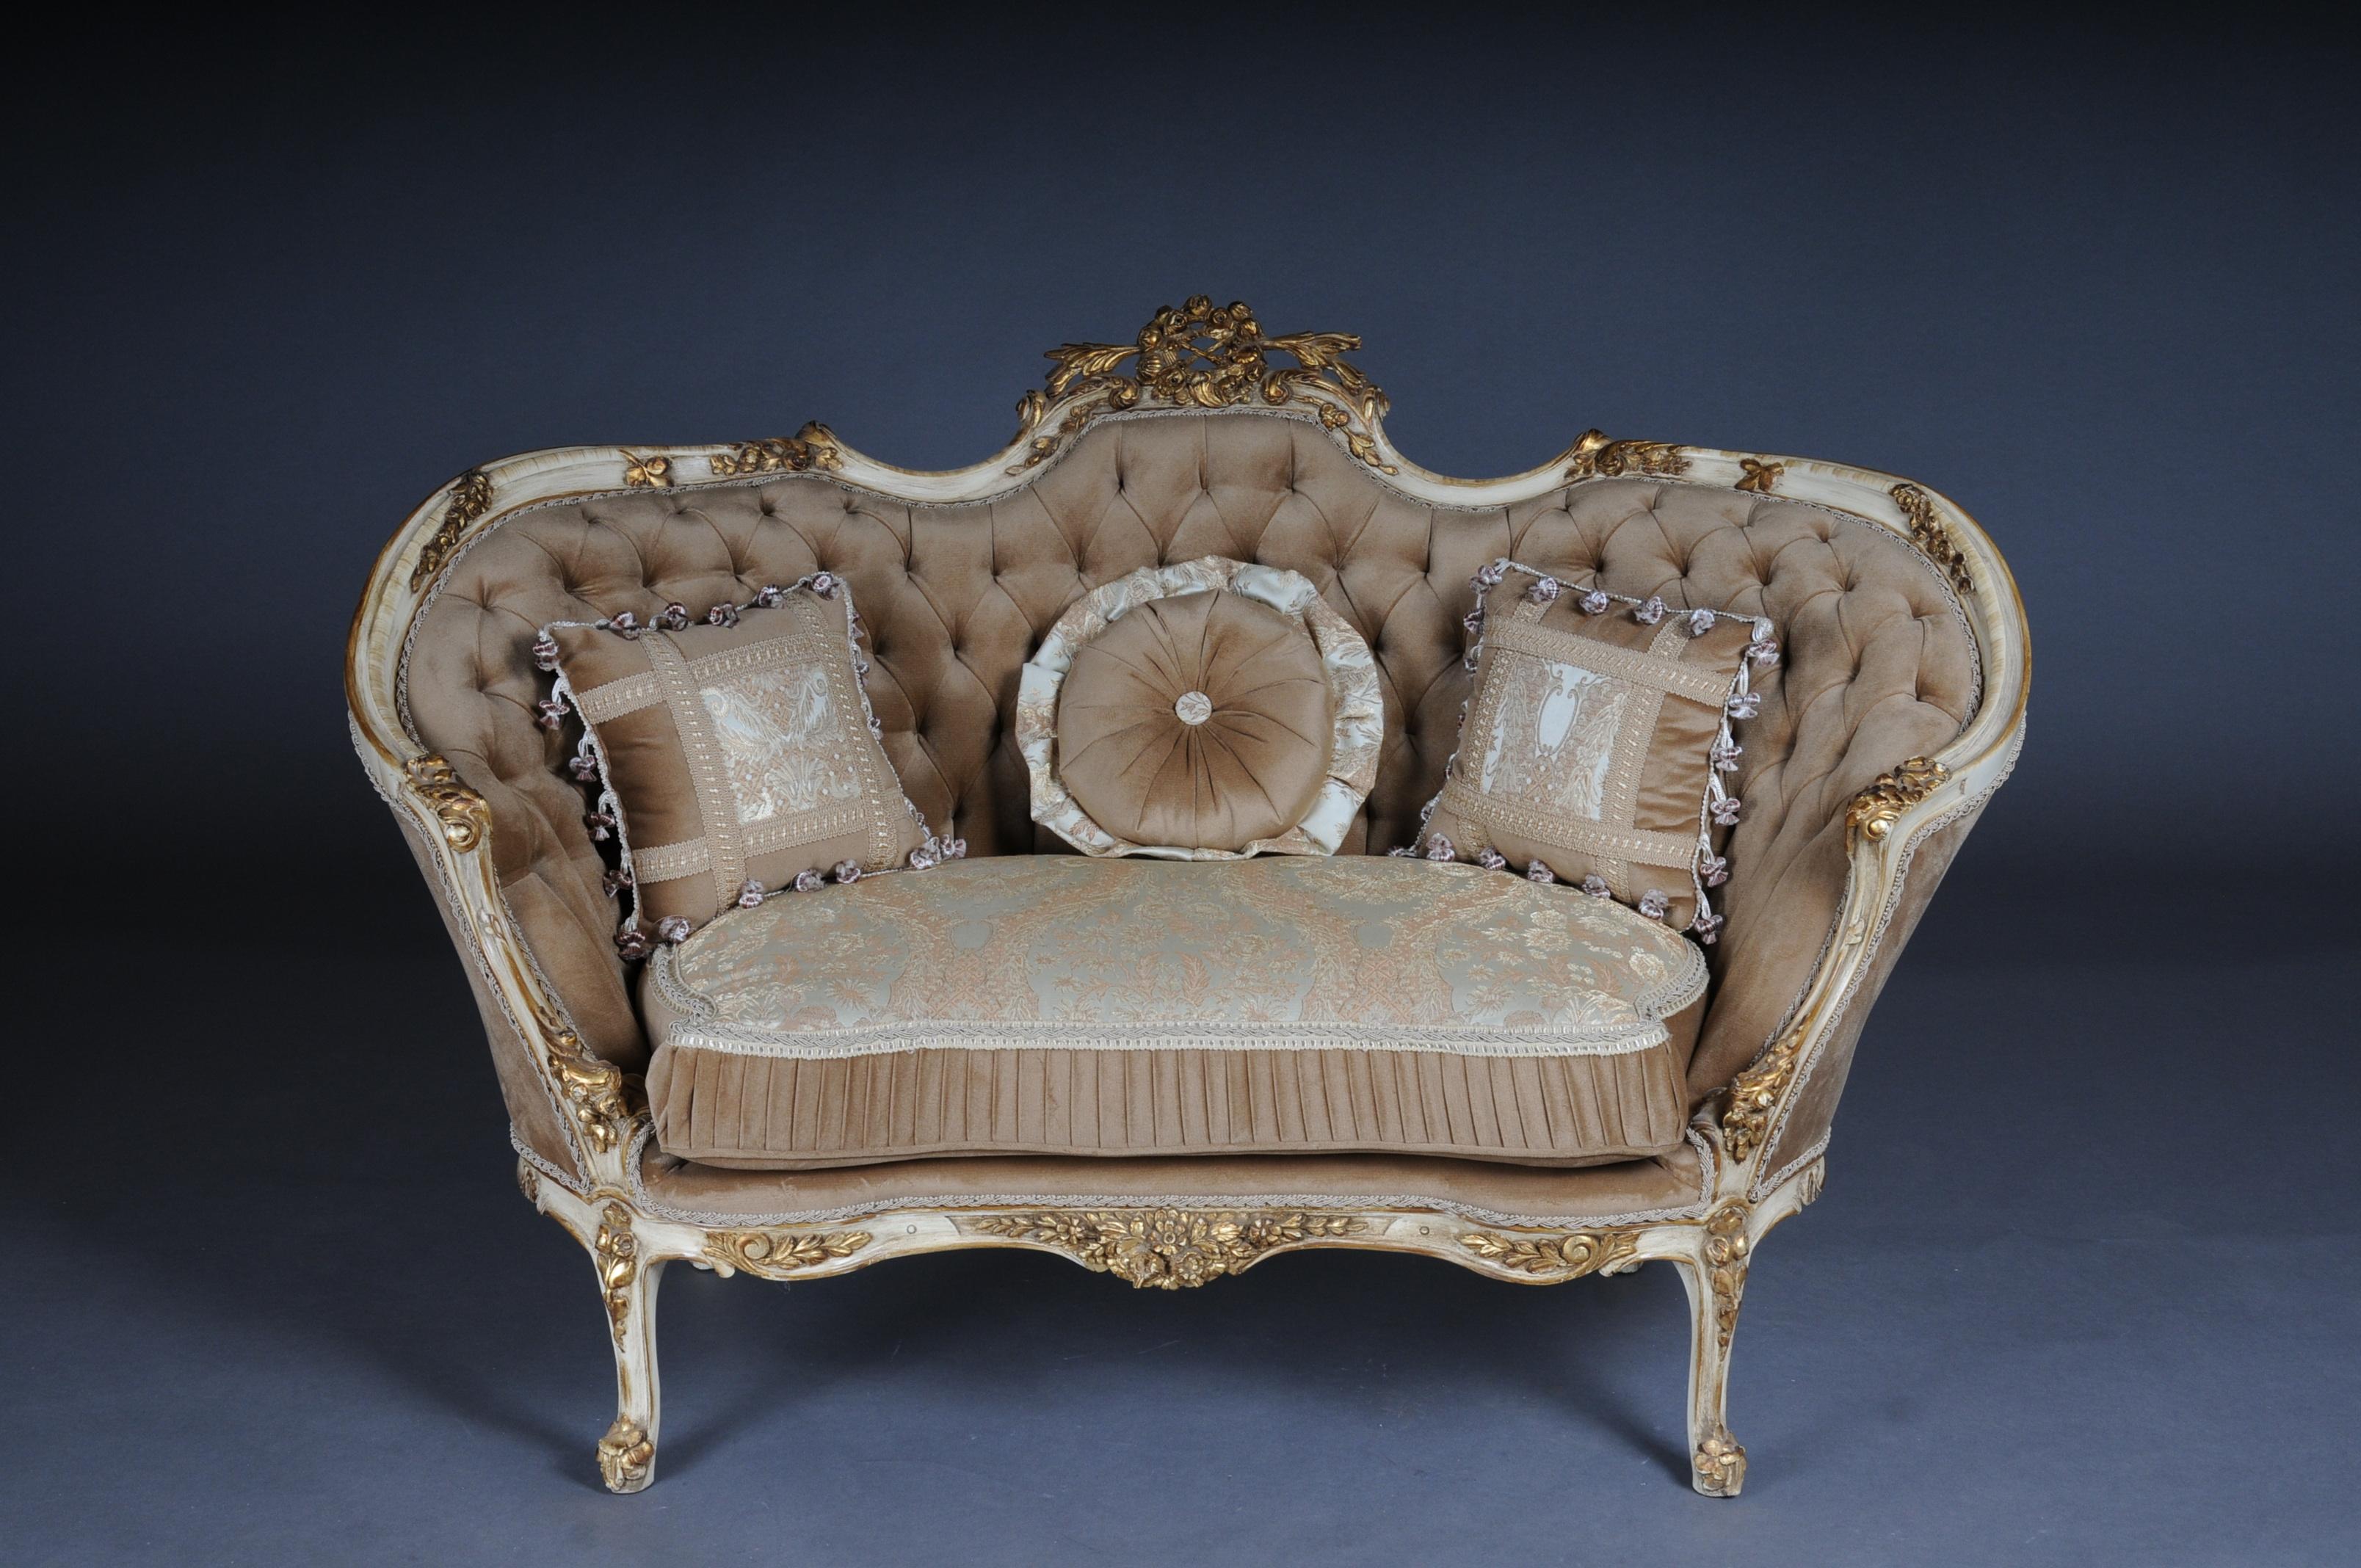 Elegant sofa, couch, Canapé in Rococo or Louis XV Style.

Solid beech wood, carved and gilded. Rising backrest framing with openwork rocaille crowning. Appropriately curved frame with richly carved foliage. Slightly curved frame on straight legs.